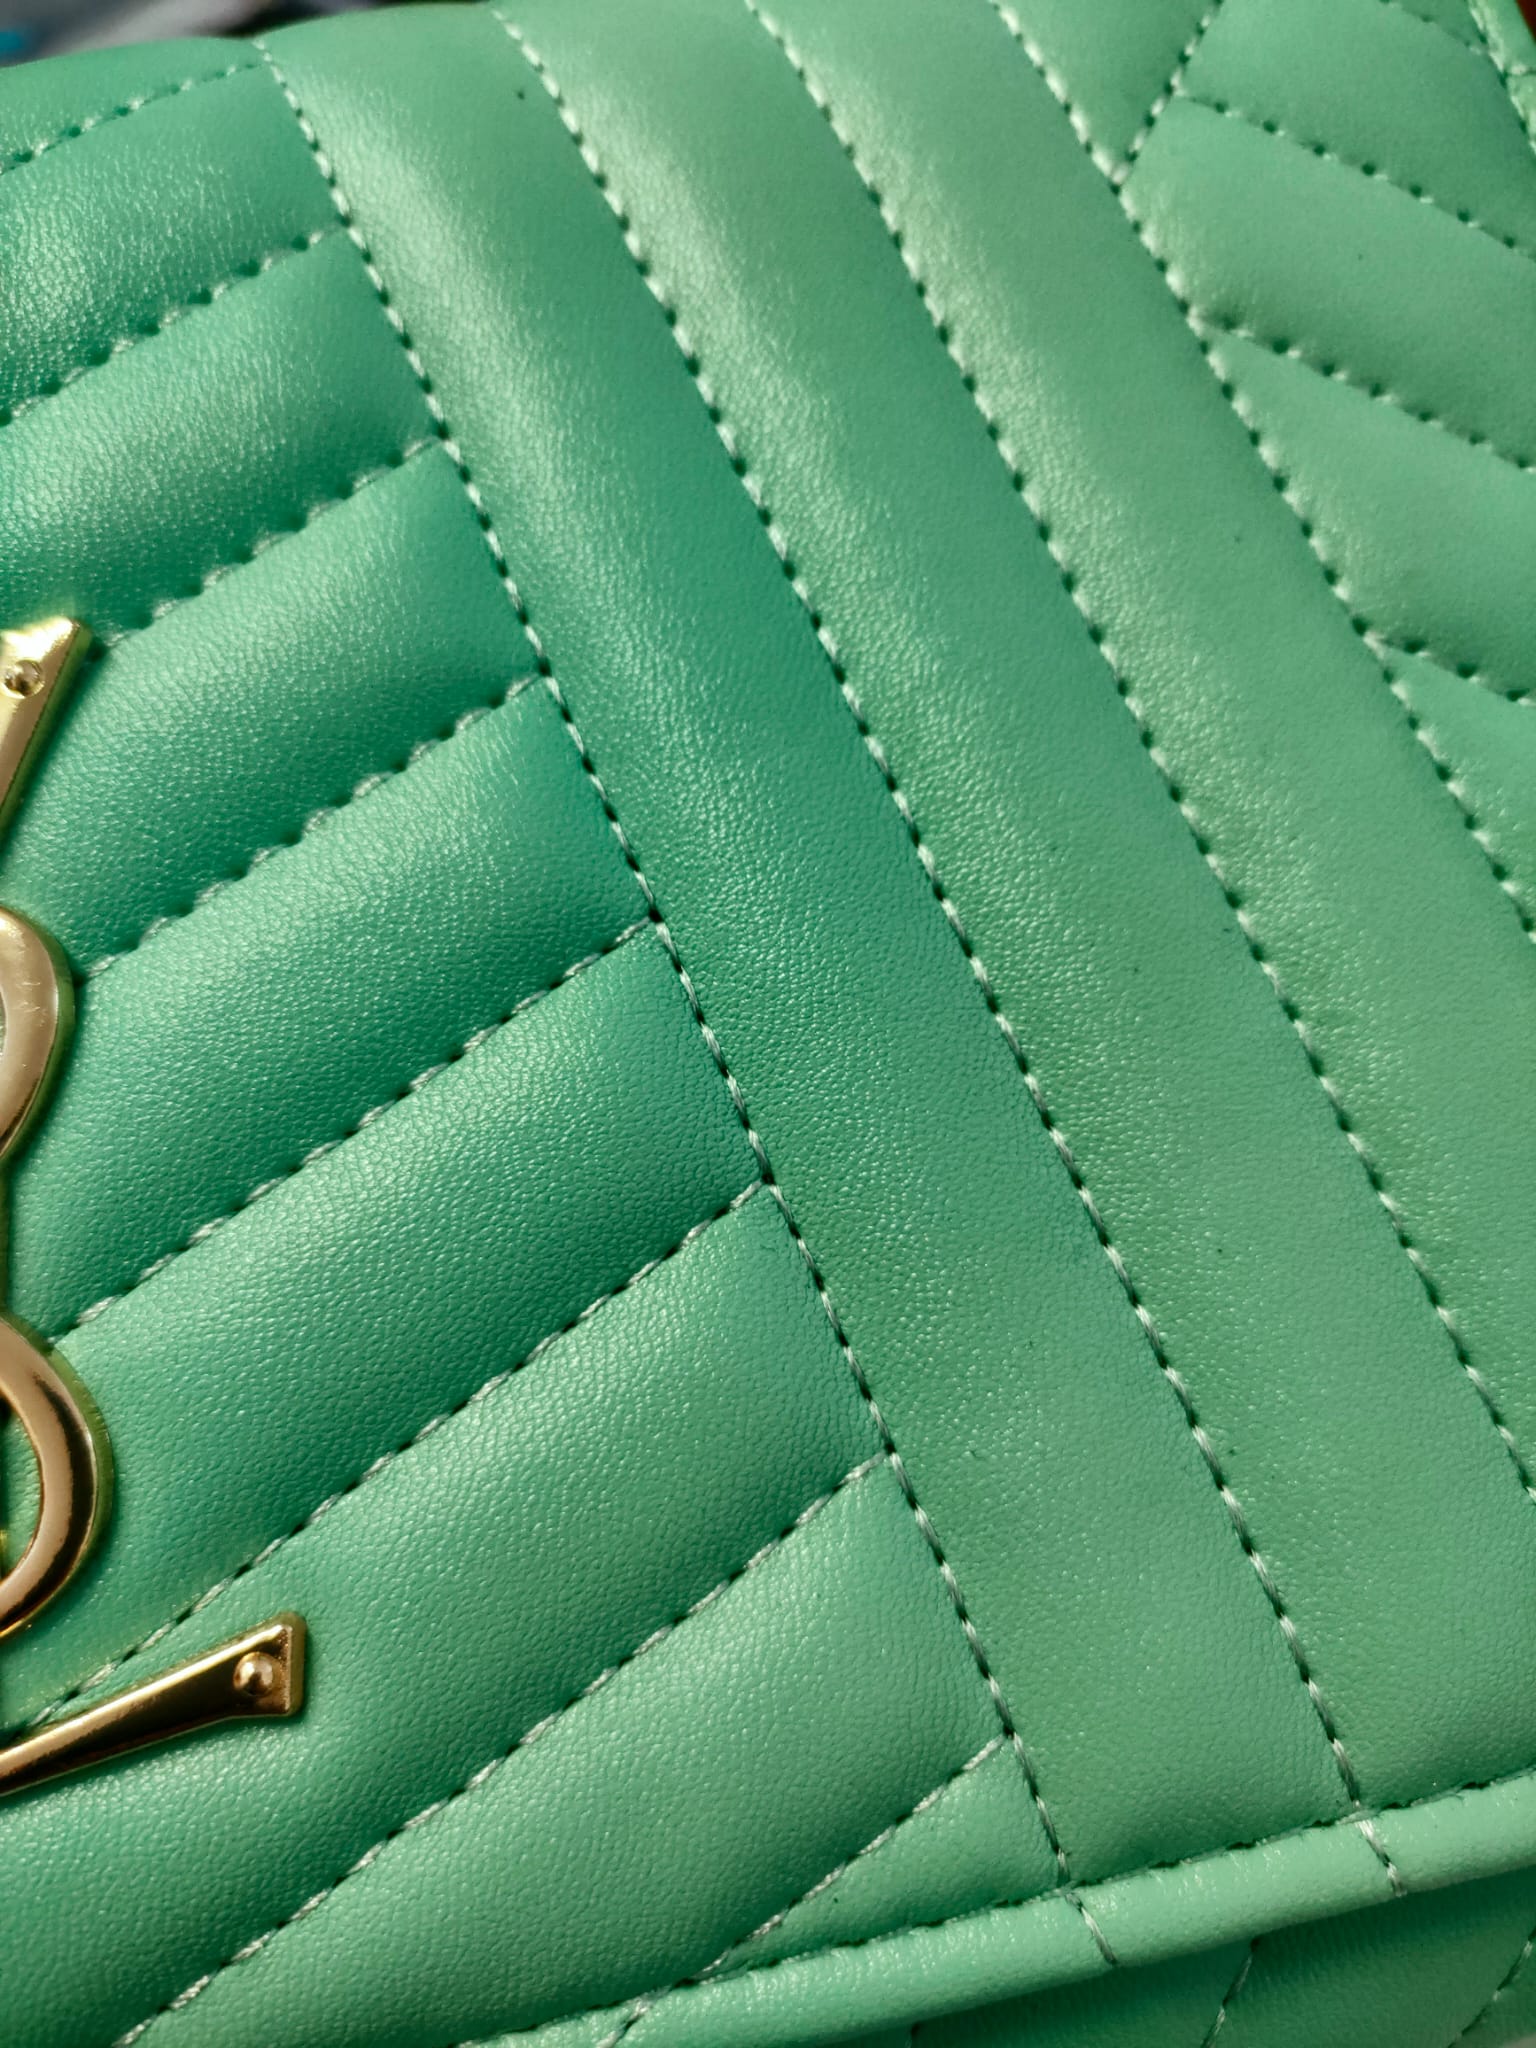 Sia Mint Quilted Bag